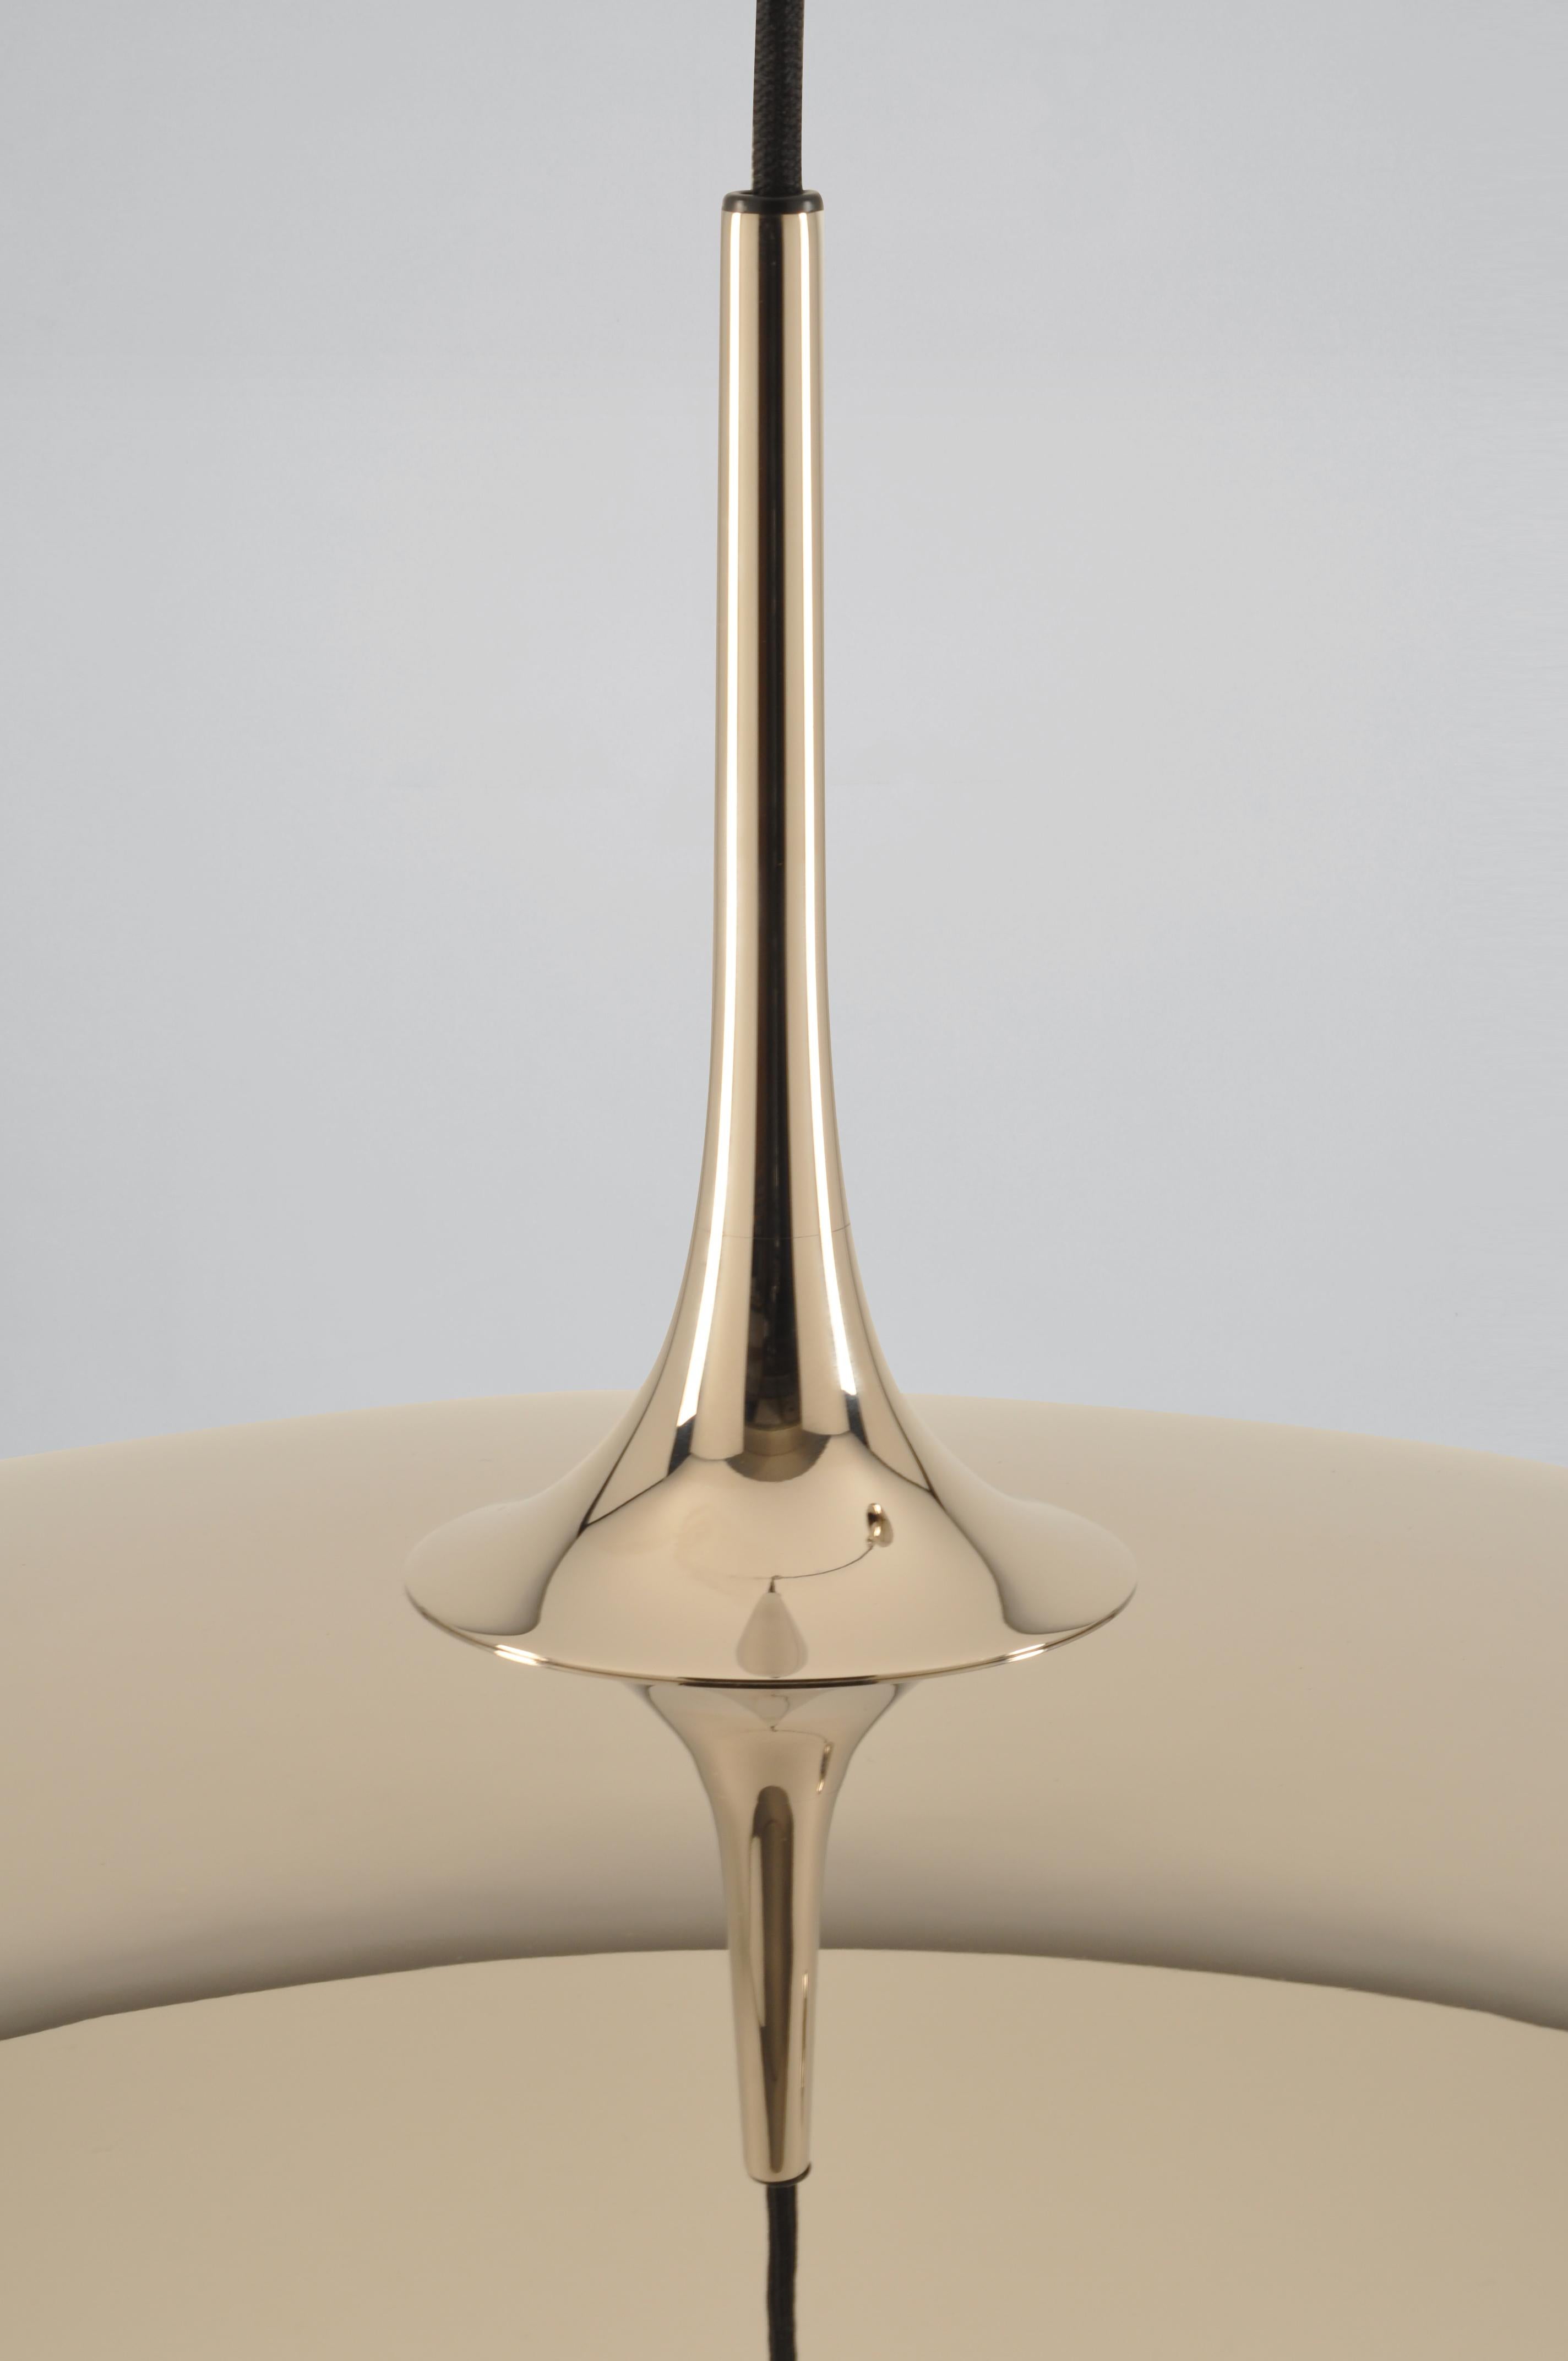 Iconic design by Florian Schulz. This lamp is in perfect condition and available in nickel or polished brass. The height is adjustable, socket: E27. 

To be on the safe side, the lamp should be checked locally by a specialist concerning local